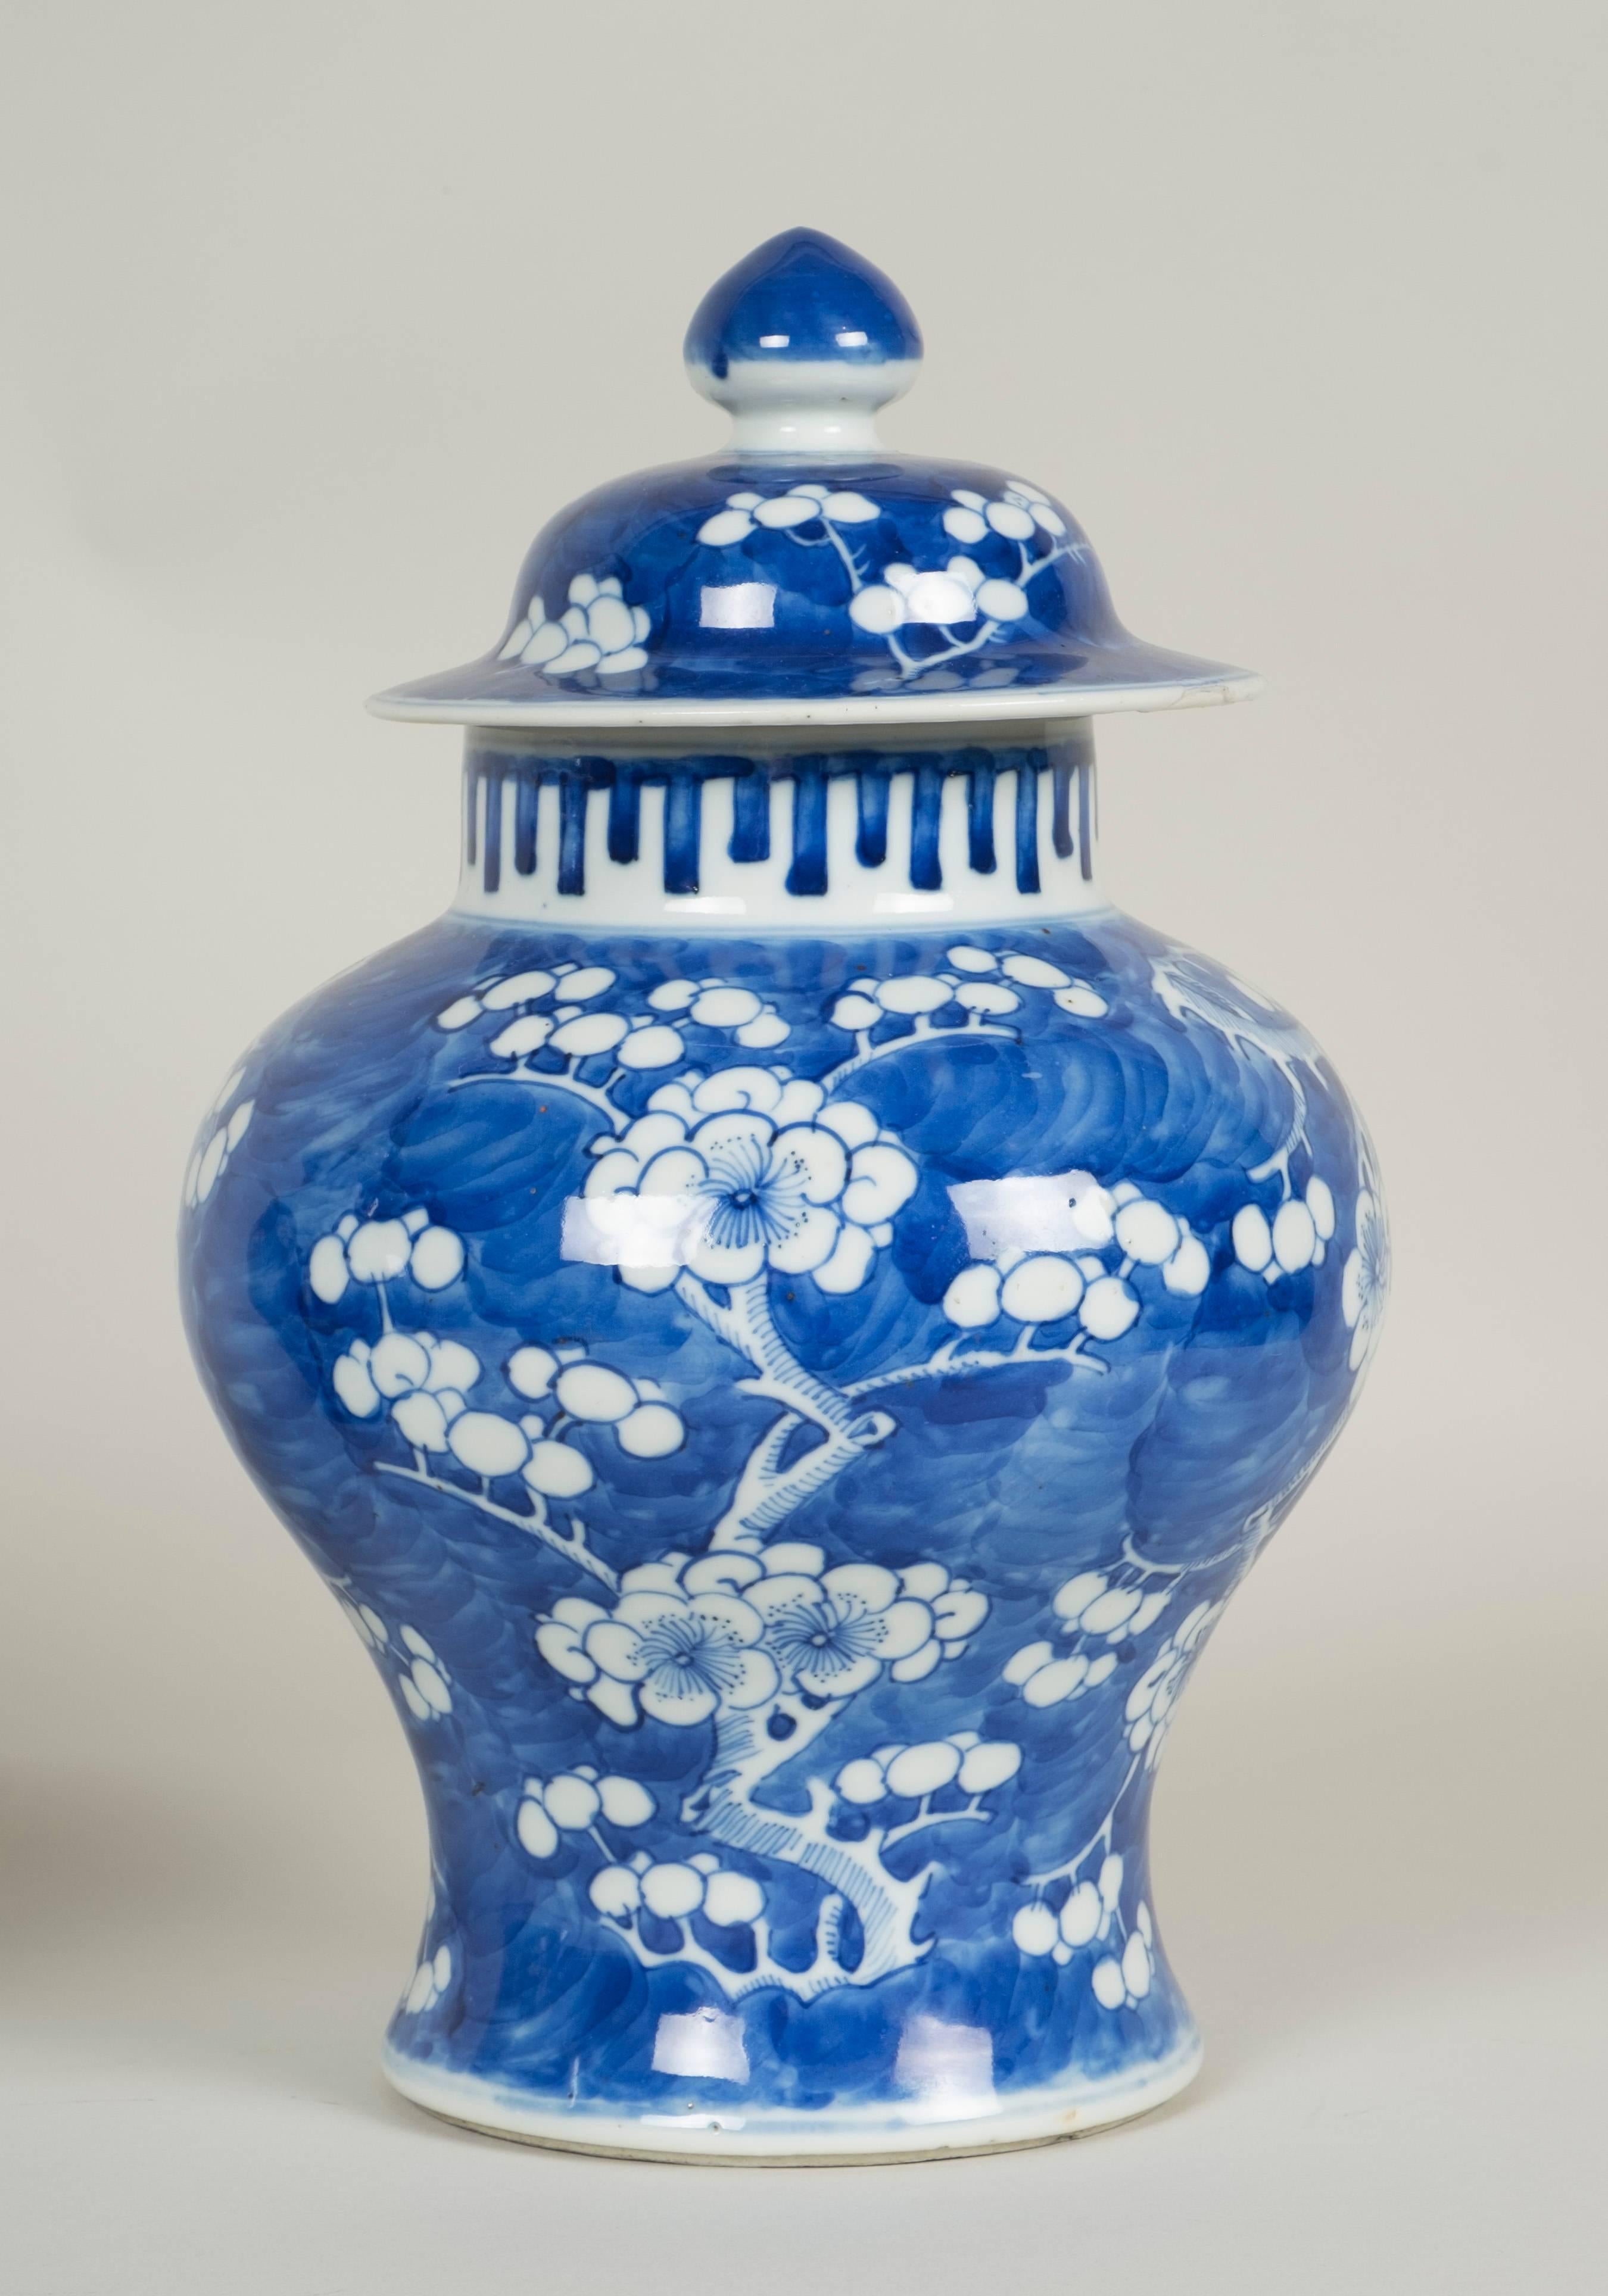 Pair of blue of China porcelain vases from the Kangxi period.
Dimensions:
28 cm H x 20 cm L.